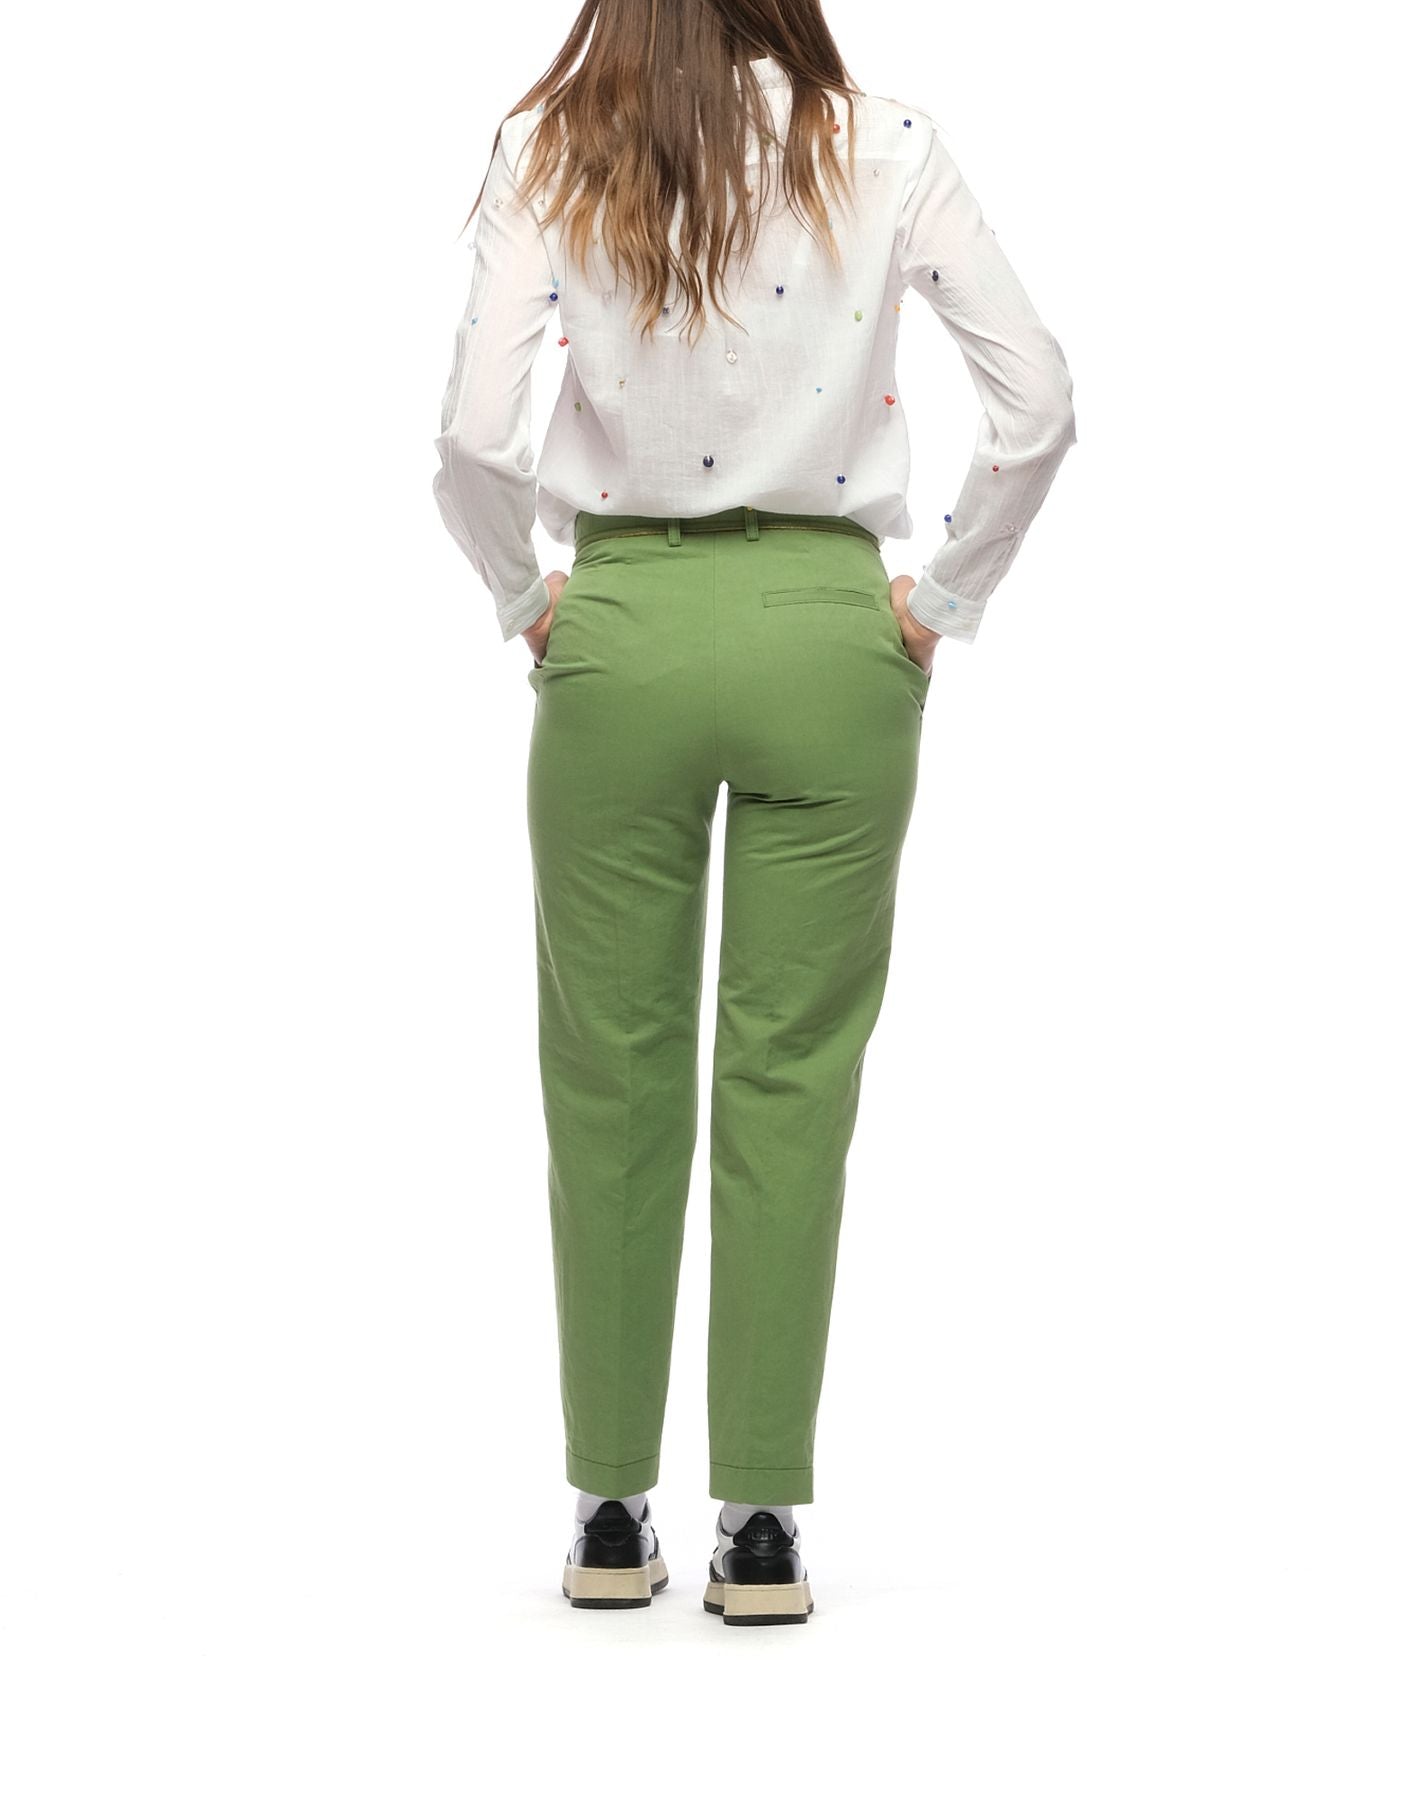 Pants for woman 10319 MY PANTS GREEN FORTE_FORTE